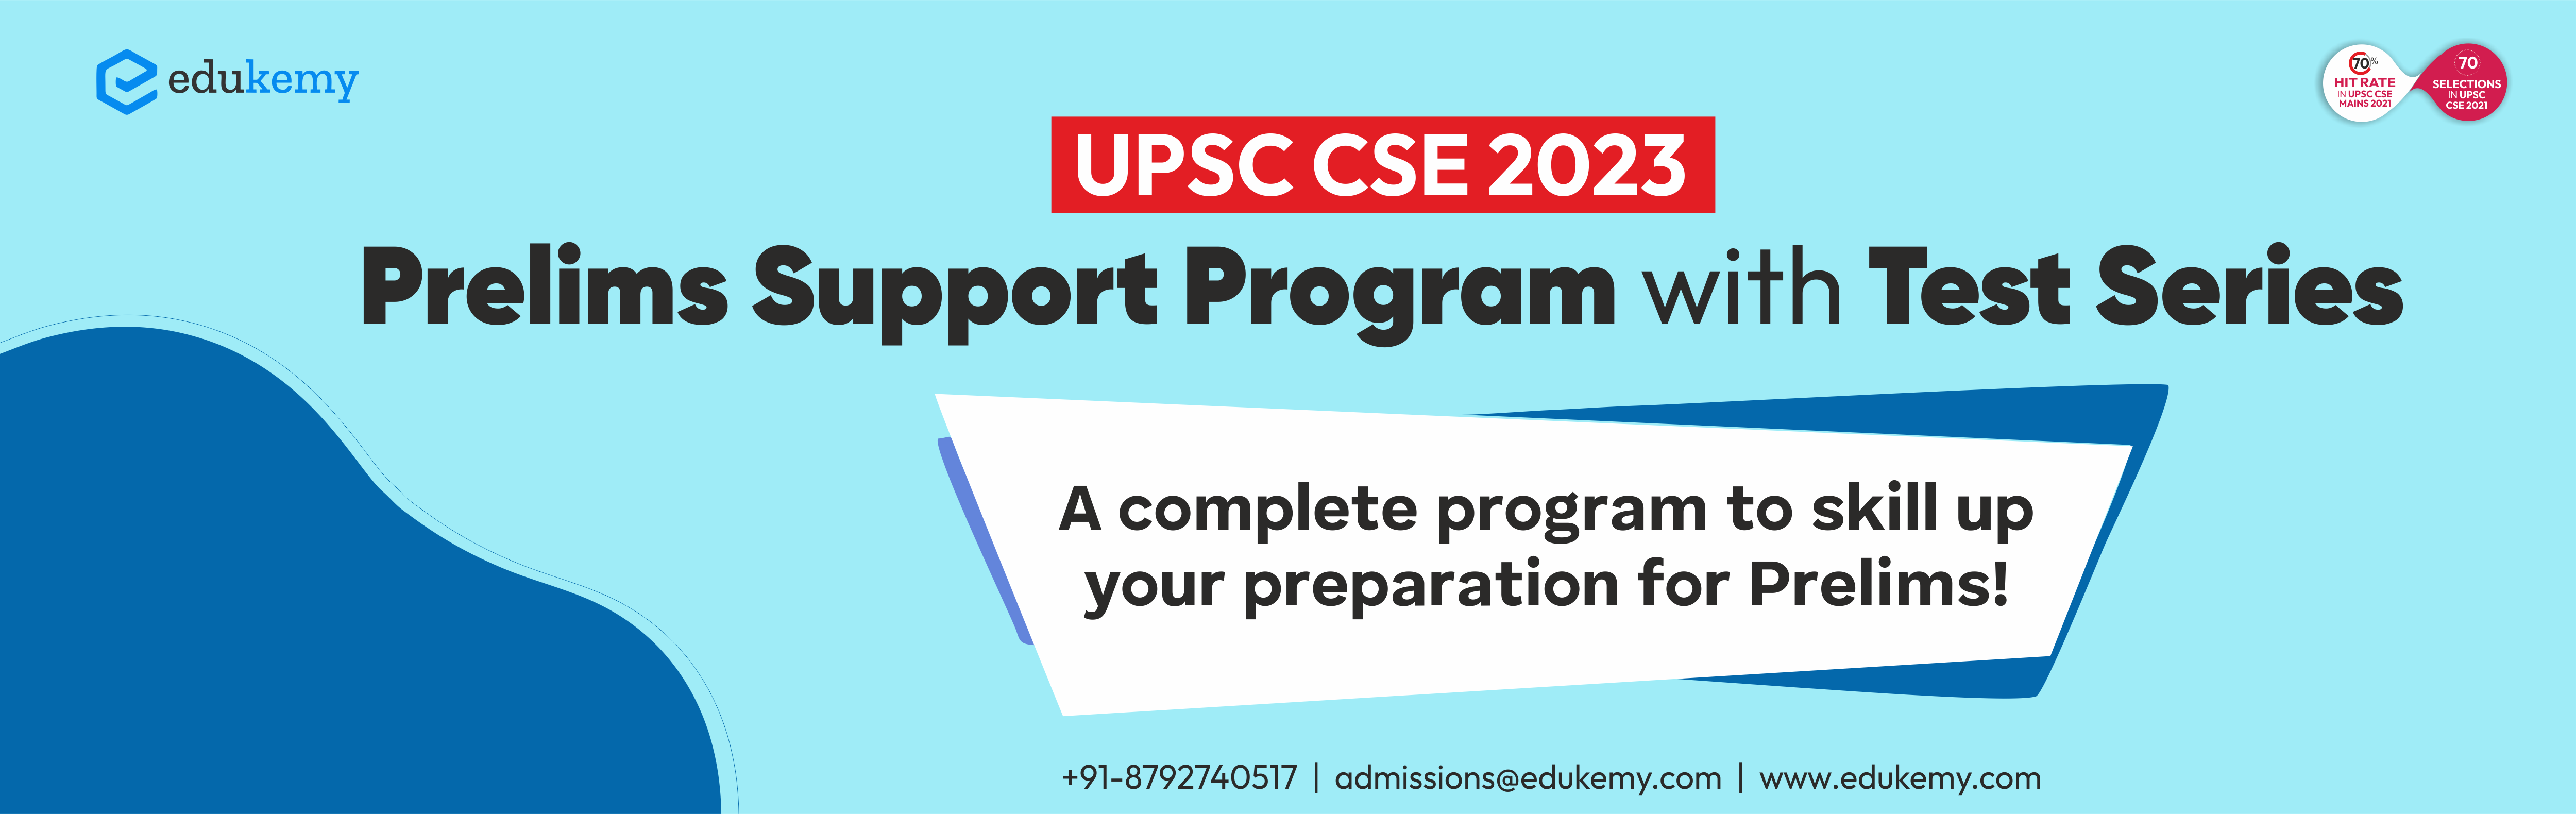 UPSC 2023 Prelims Support Program with Structured Mentorship & Test Series - Edukemy